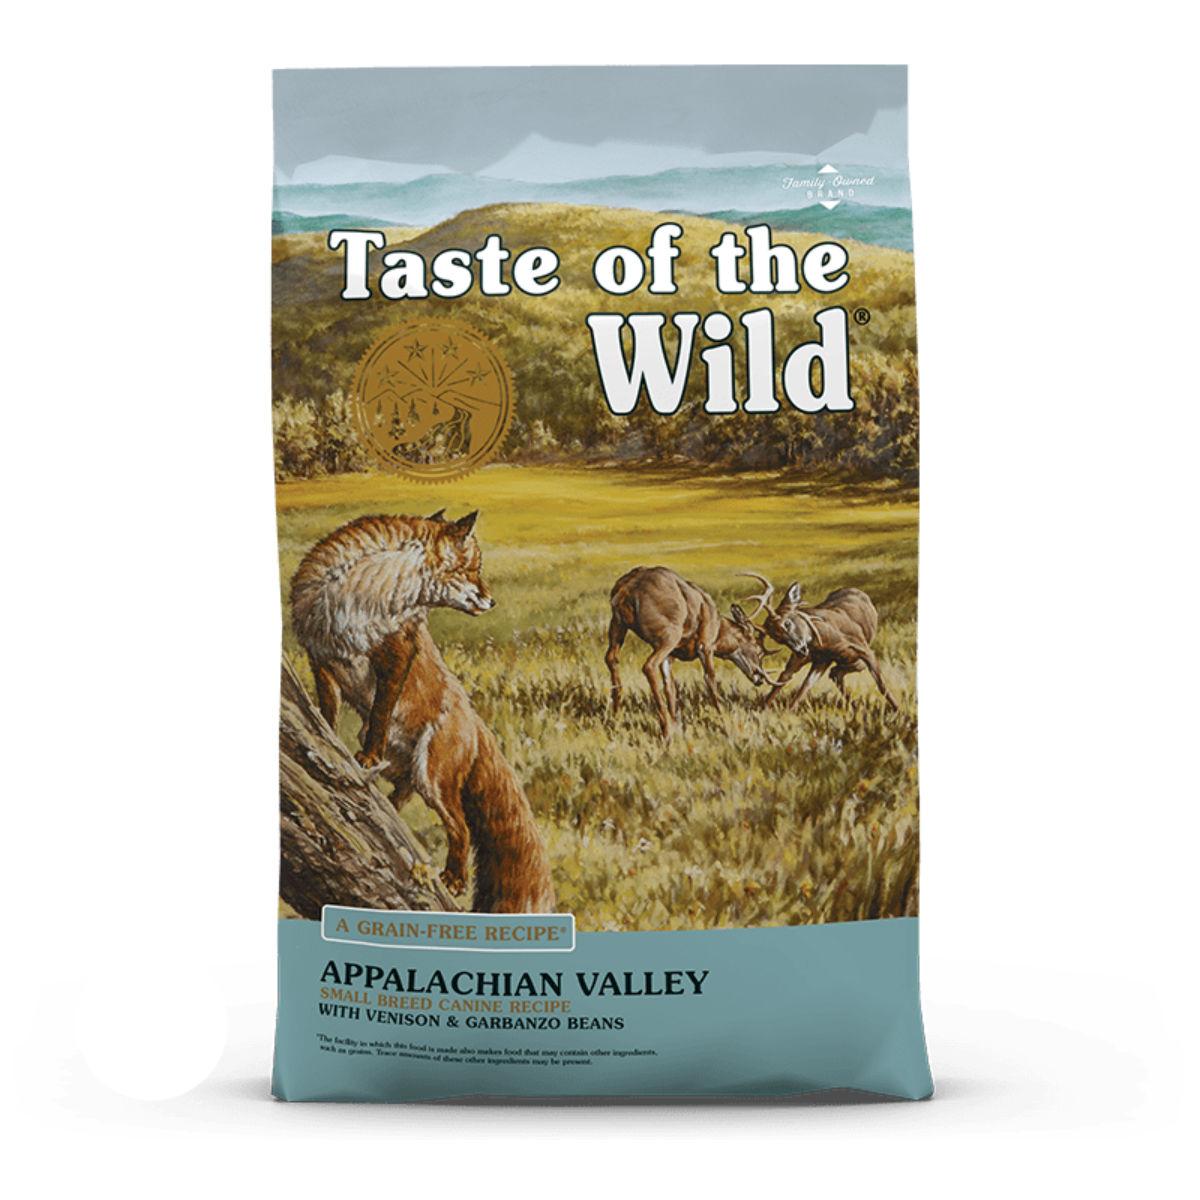 Taste of the Wild Appalachian Valley Small Breed Dog Food - Venison & Garbanzo Beans